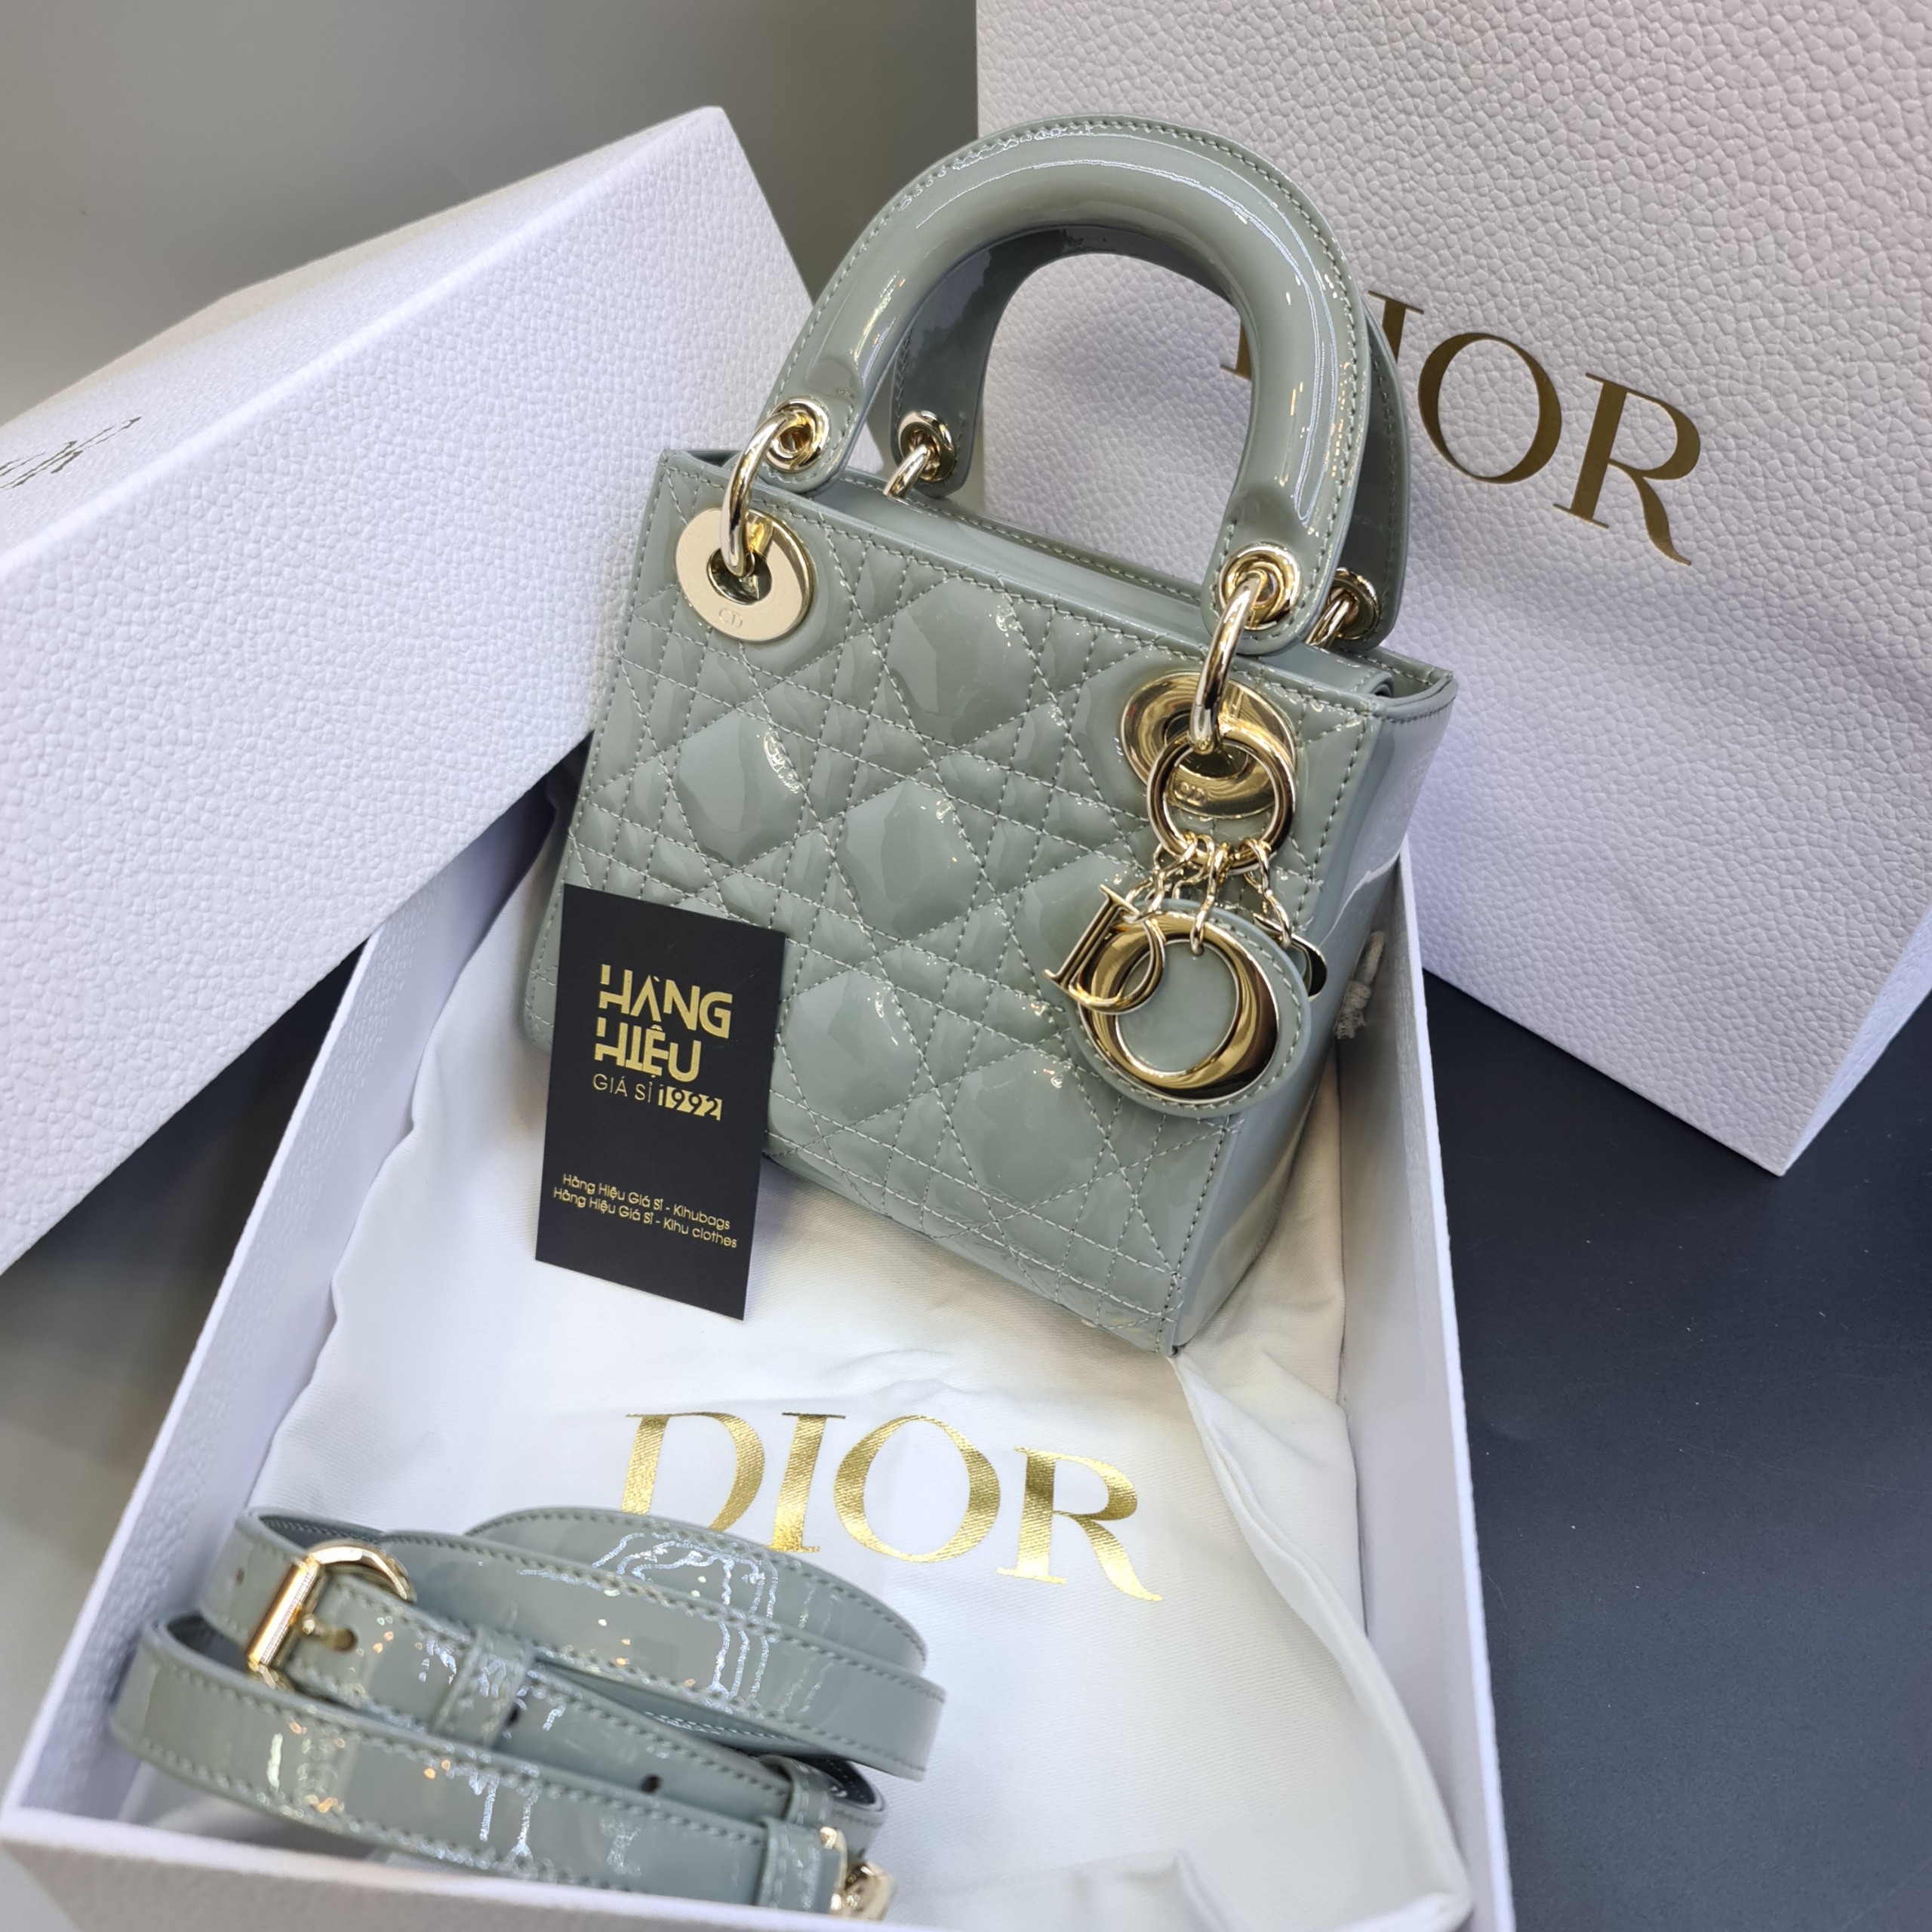 Lady Dior bag is one of the most classic bags but is it worth it Lady Dior  review  what you need to know before you buy